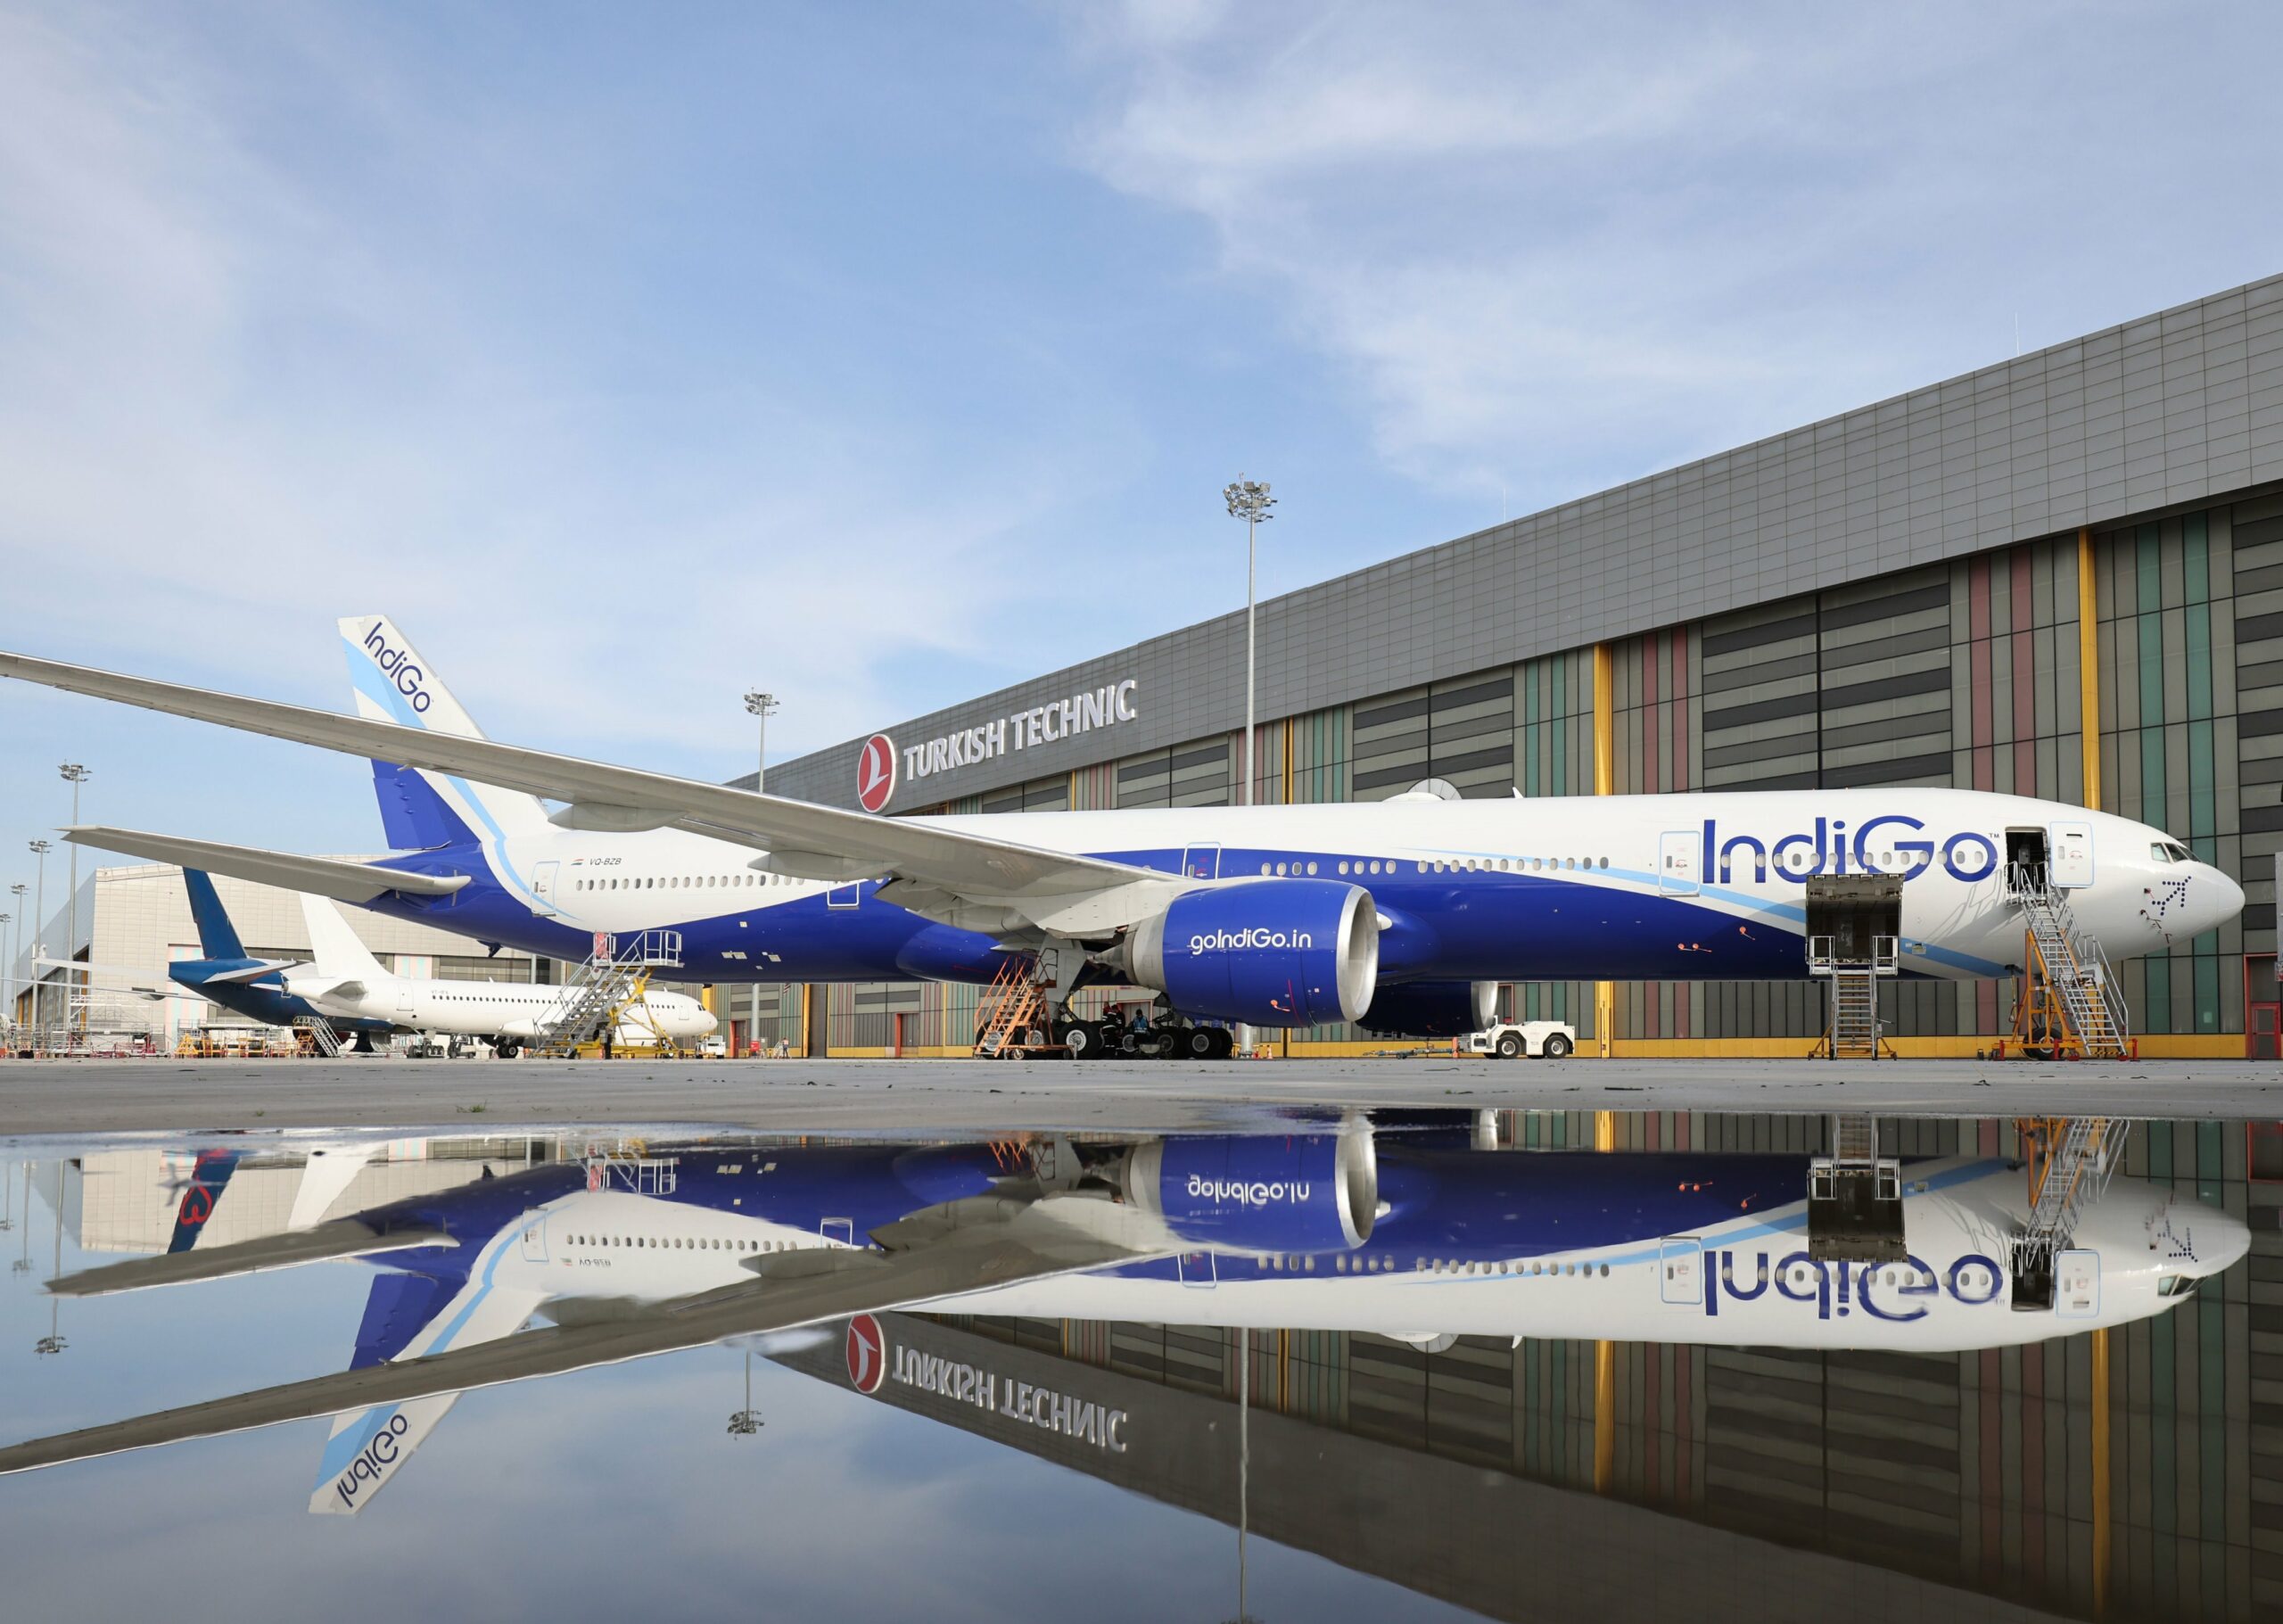 Revealed: IndiGo’s First Boeing 777 Leaves The Paint Shop